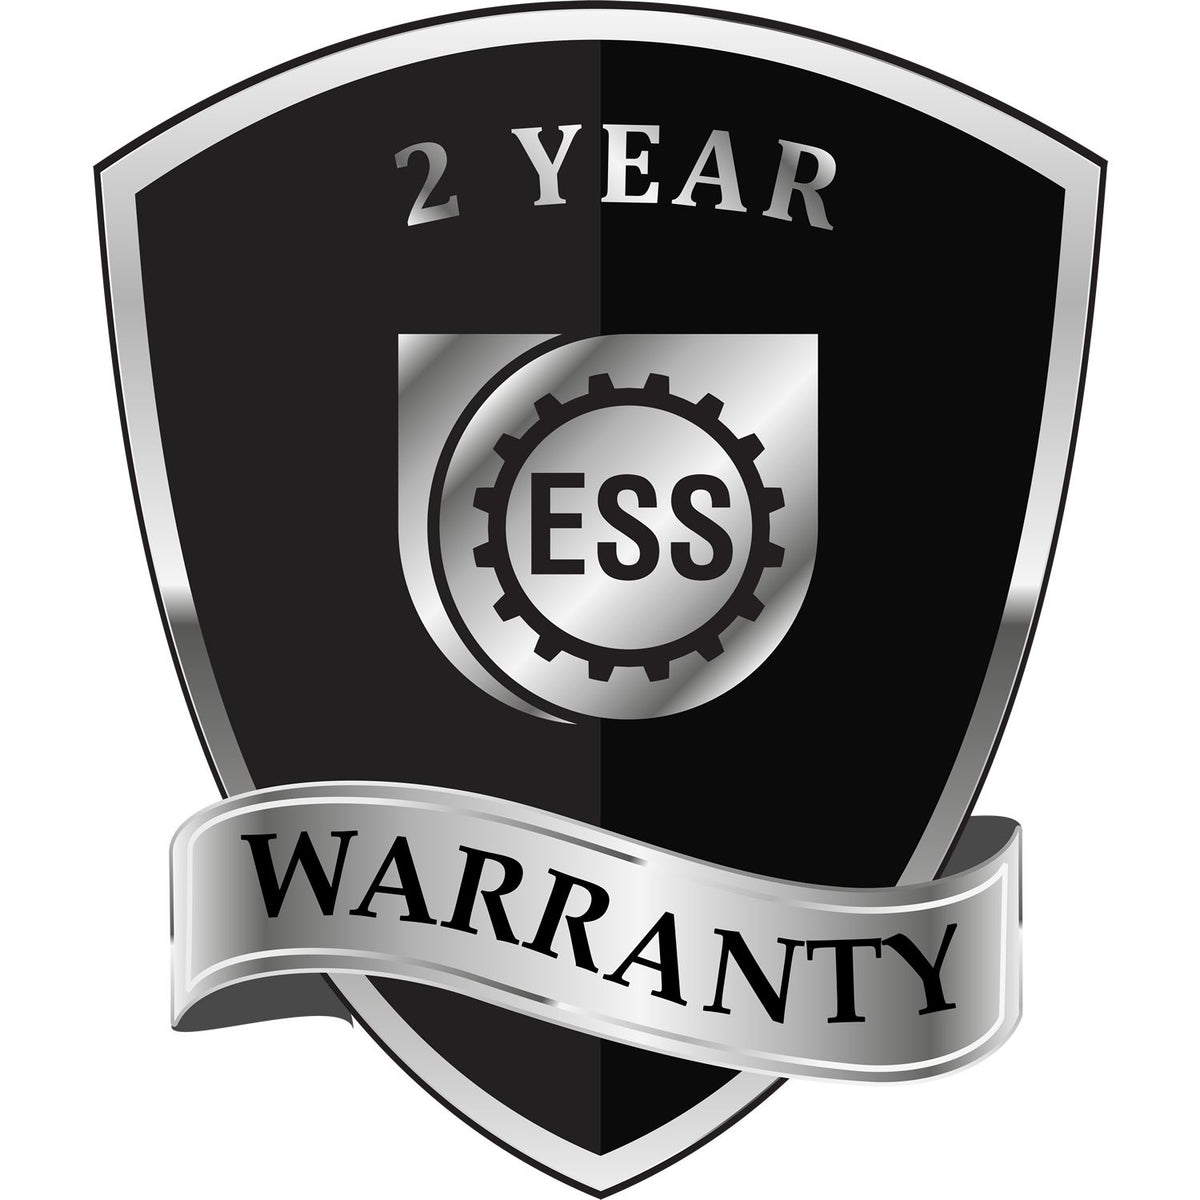 A black and silver badge or emblem showing warranty information for the Gift Nevada Engineer Seal